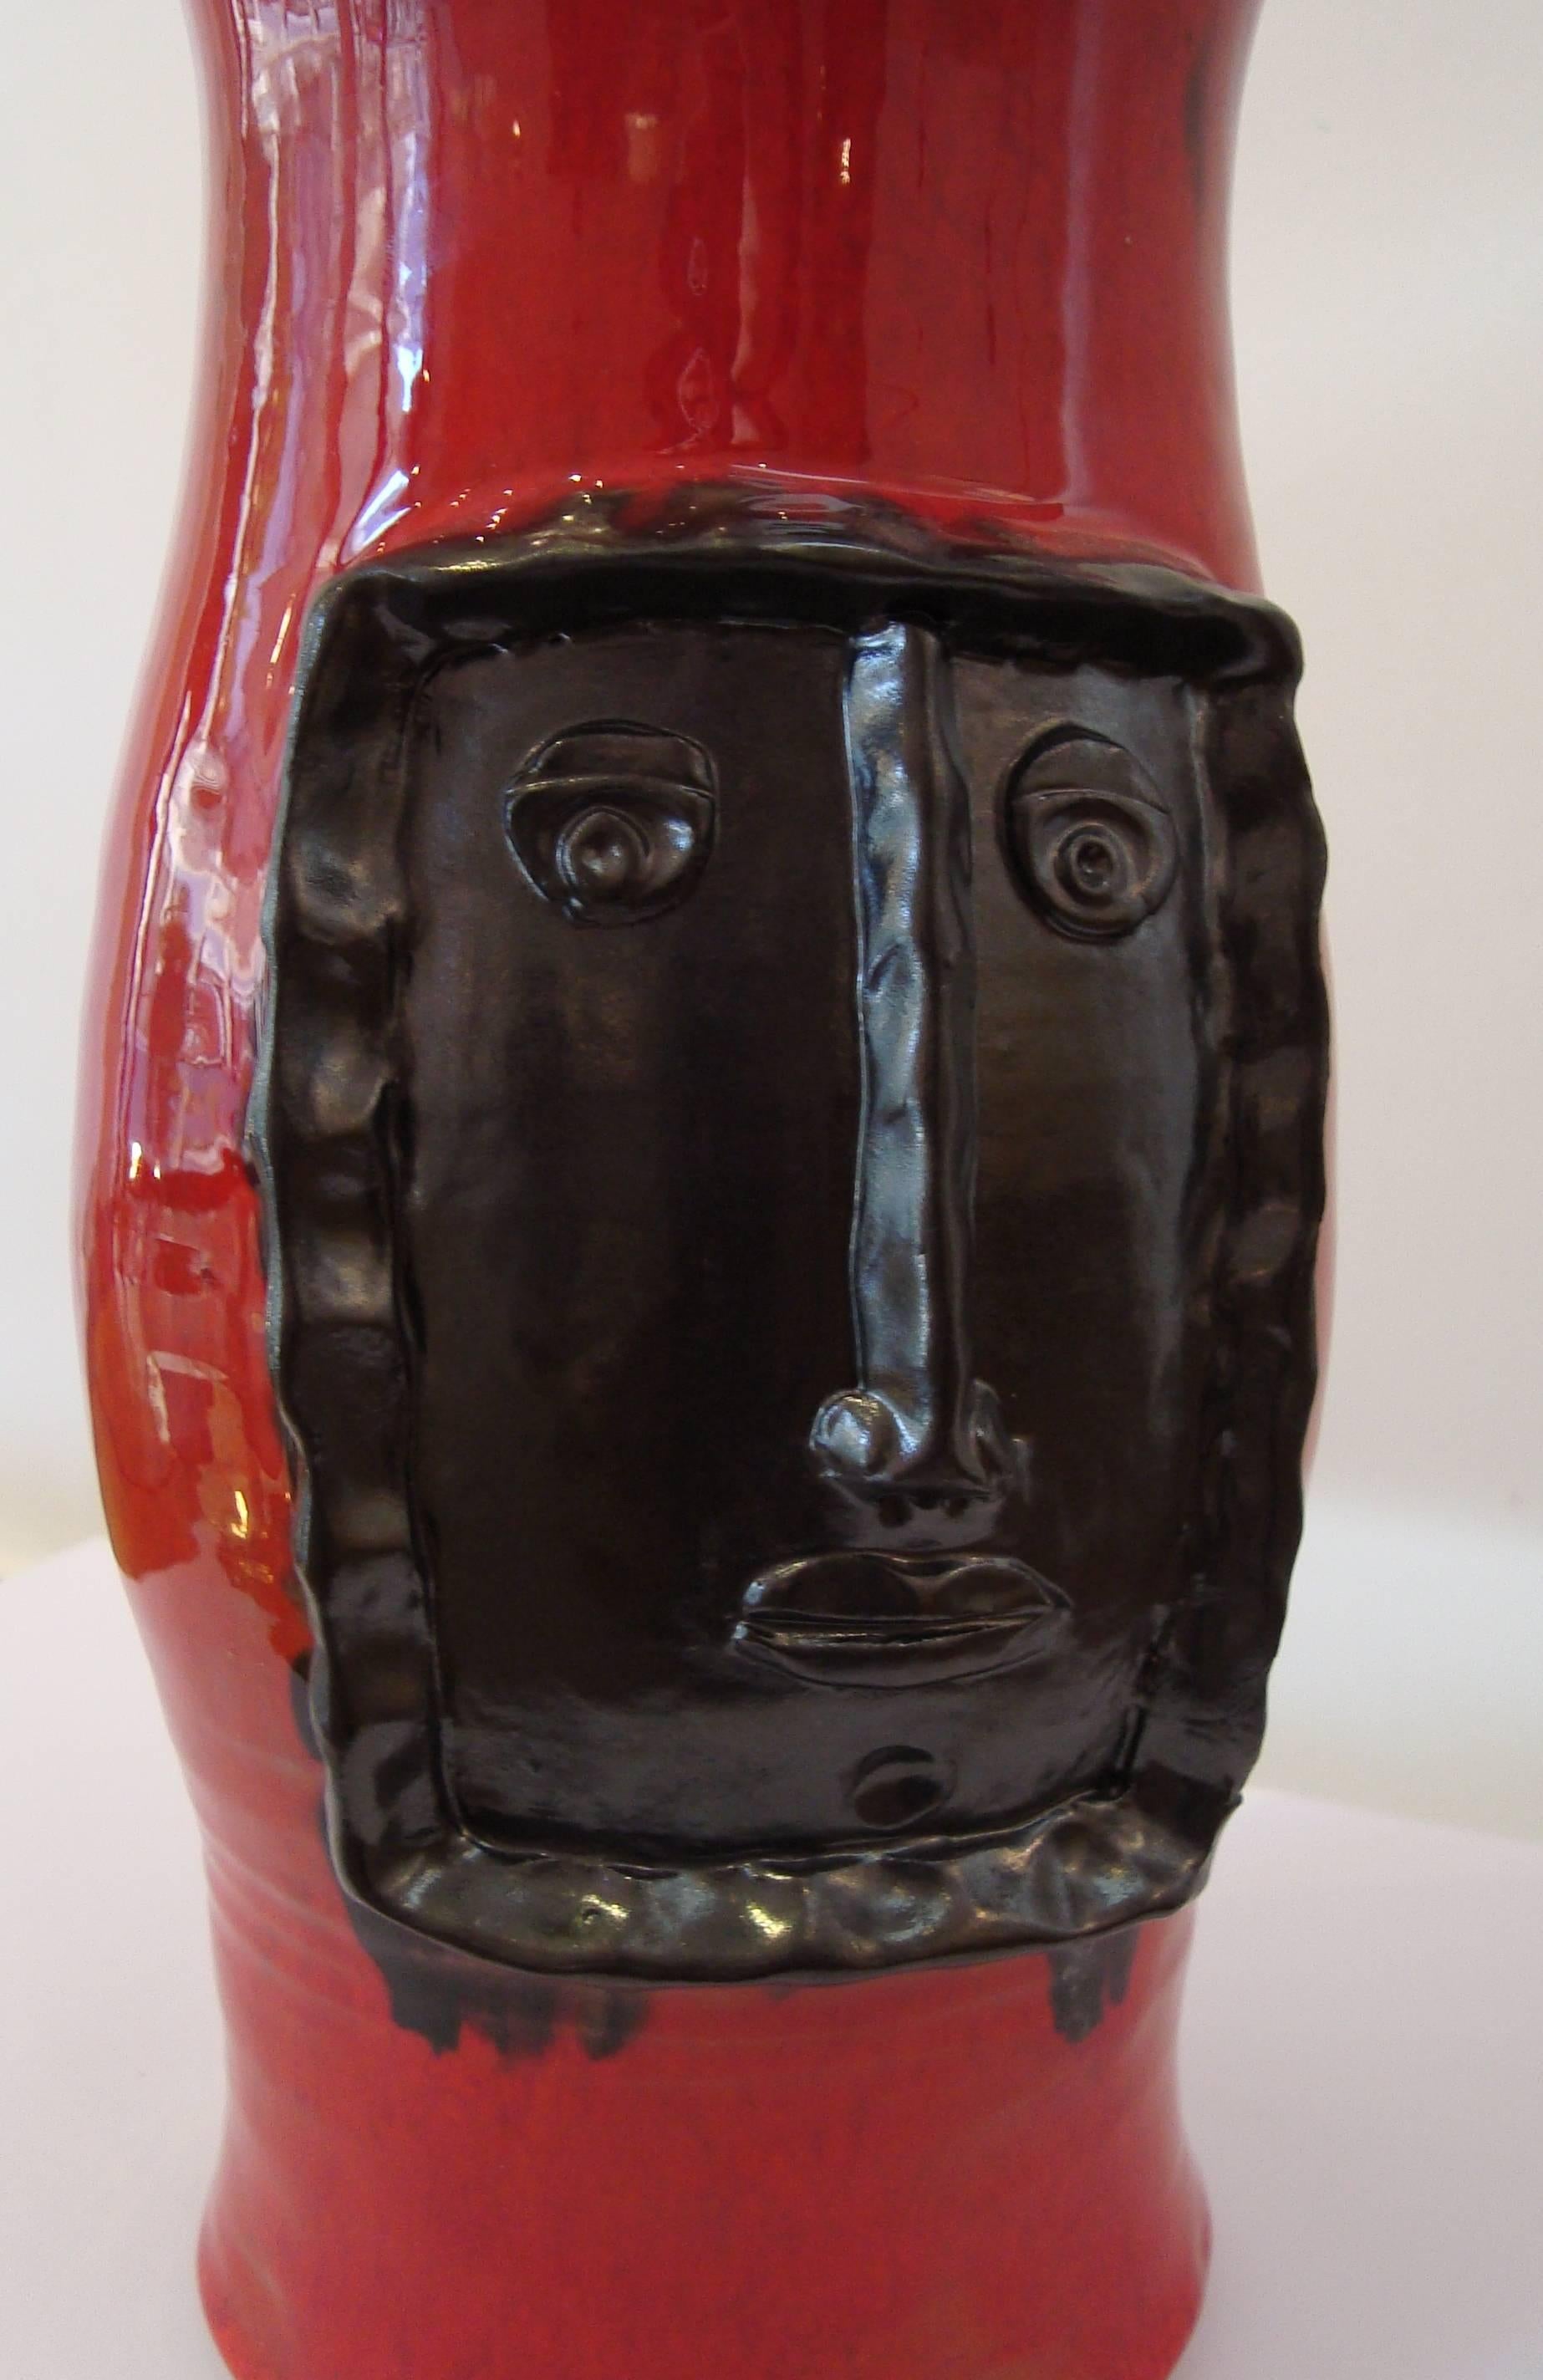 Enameled Red Vase with Black Relied Head, by Cloutier Brothers